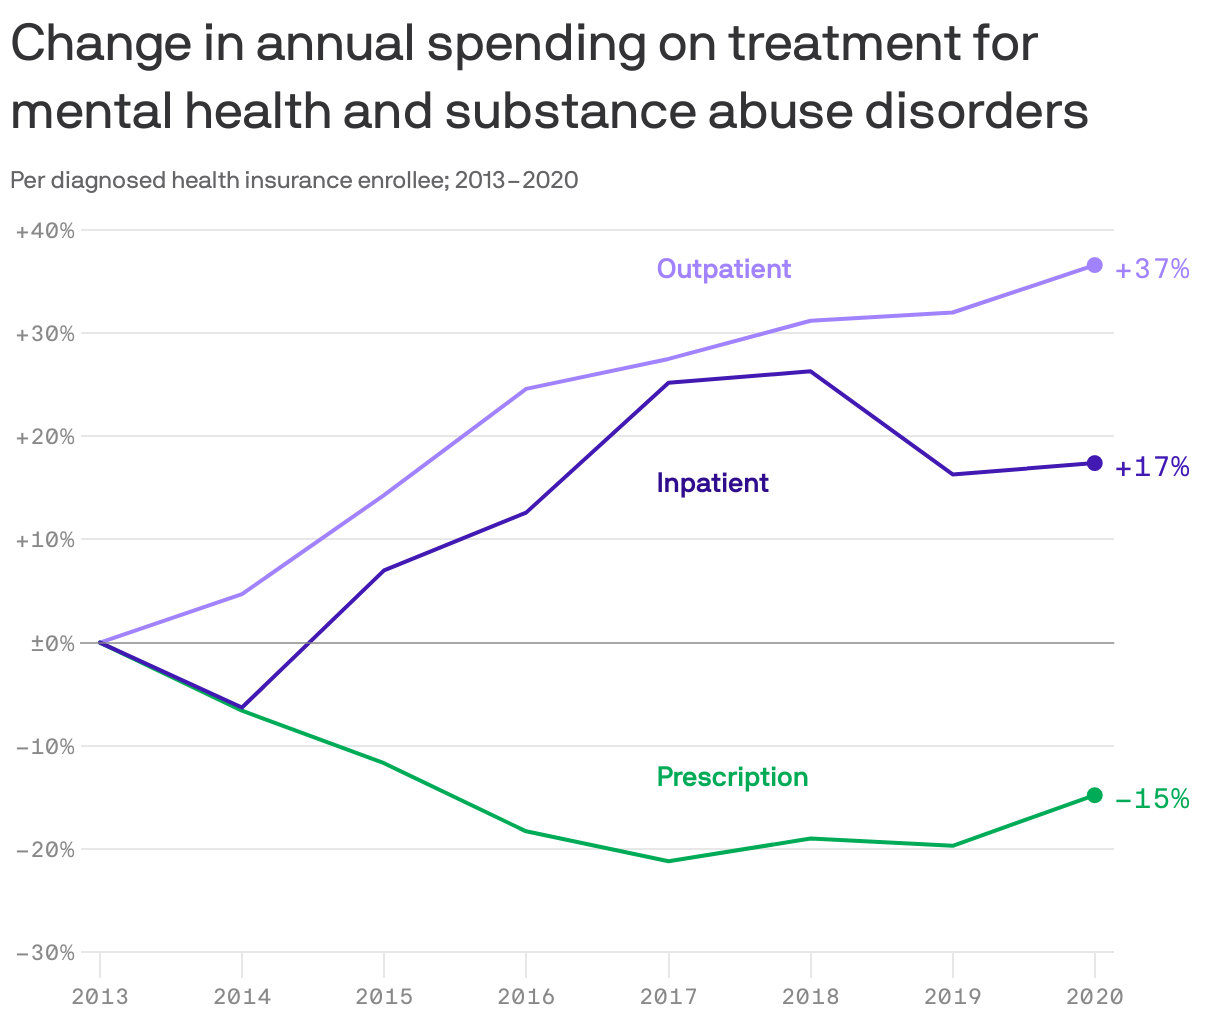 Change in annual spending on treatment for mental health and substance abuse disorders